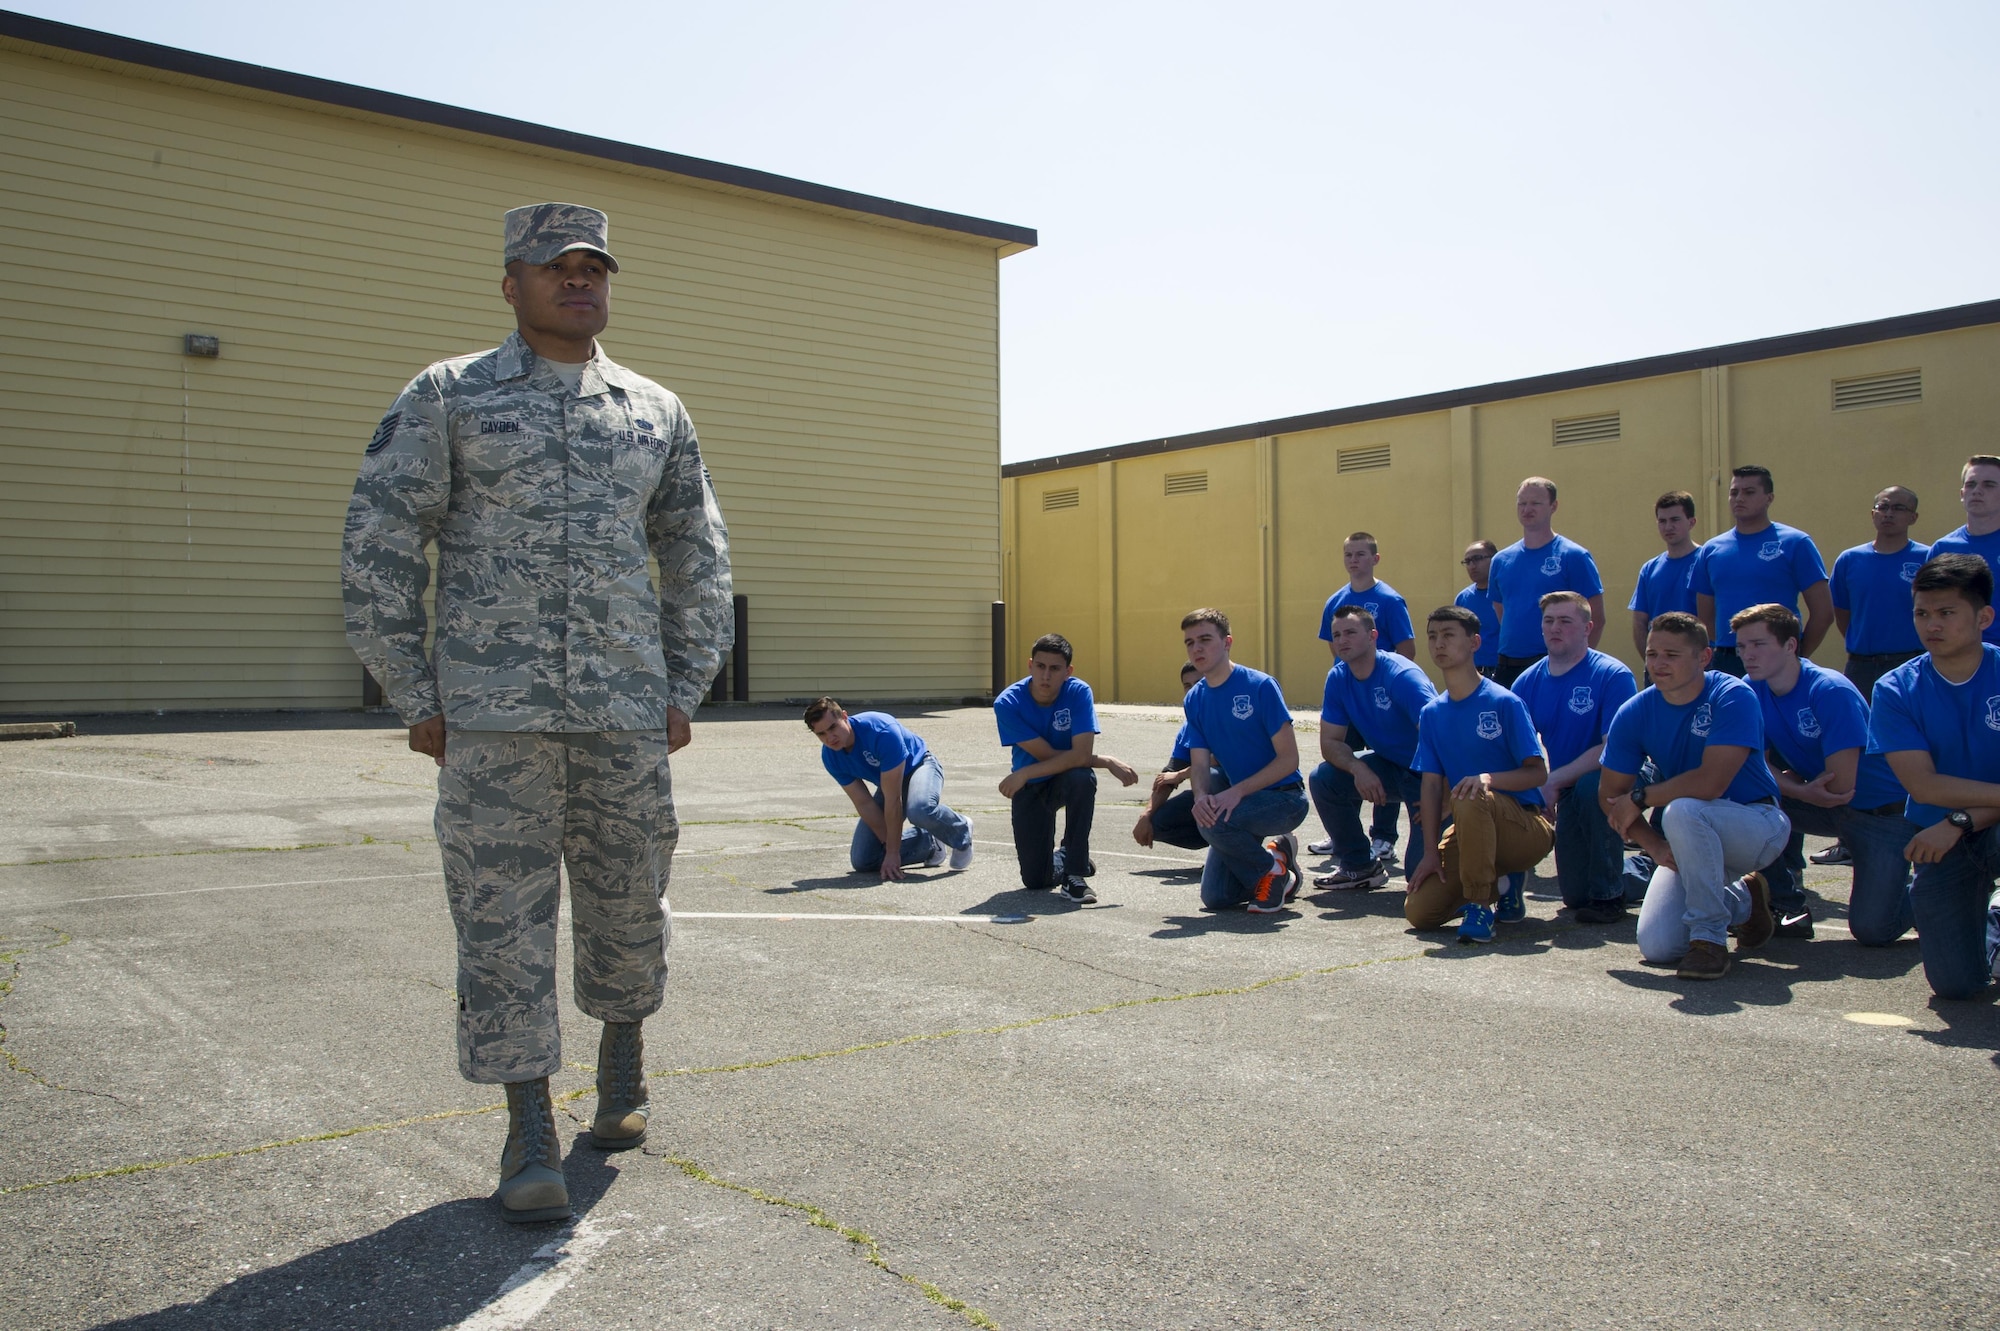 Tech. Sgt. Marc Gayden, Beale Honor Guard team lead, speaks with the 940th Air Refueling Wing’s Development and Training Flight during Airman’s time April 9, 2017, at Beale Air Force Base, California. Gayden spoke to the flight about commitment and how to be effective in the Air Force. (U.S. Air Force photo by Senior Airman Tara R. Abrahams)